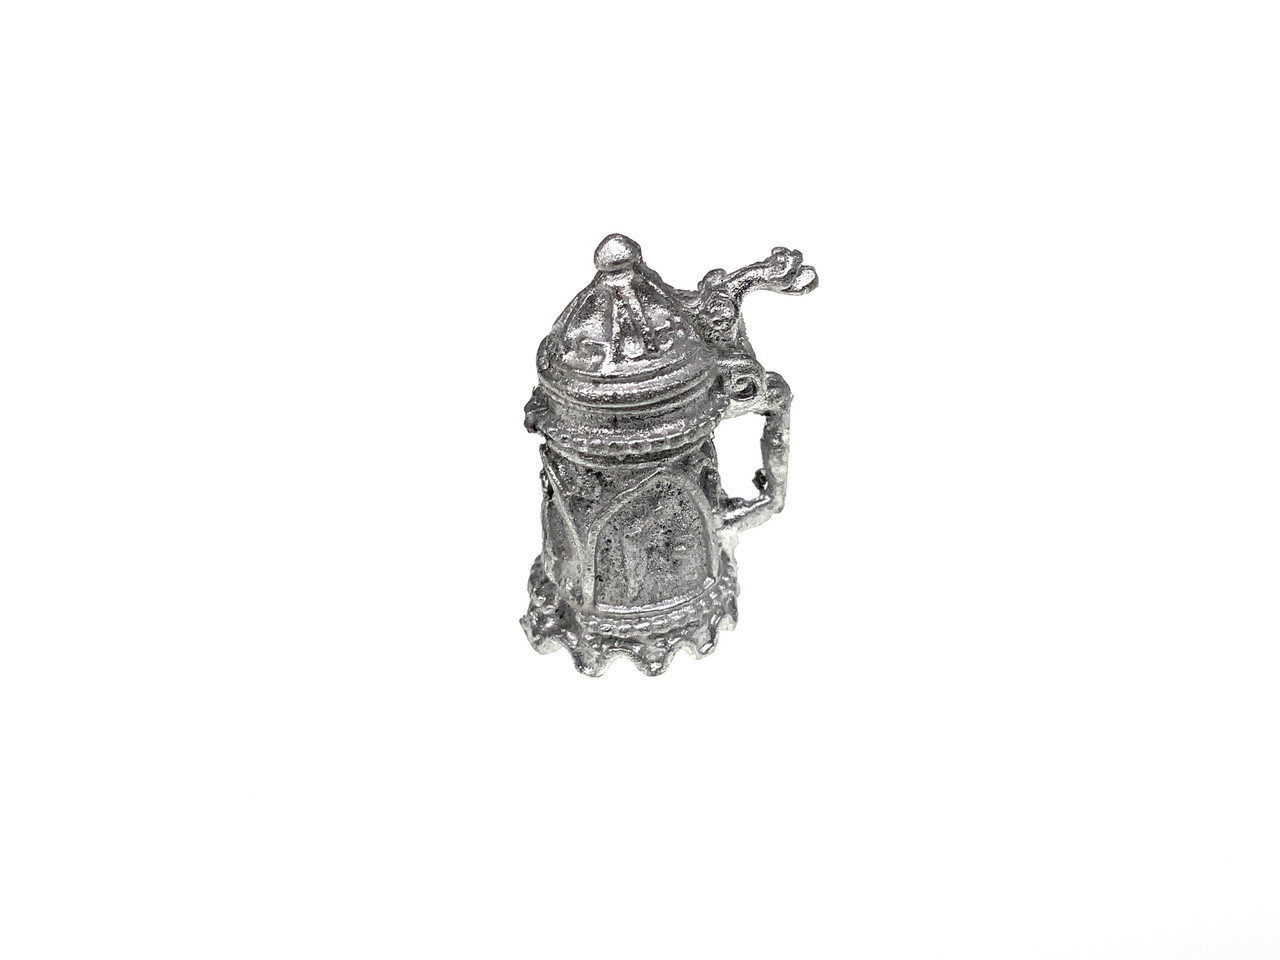 MM-26 Beer Stein Beautifully Detailed Dollhouse Miniature